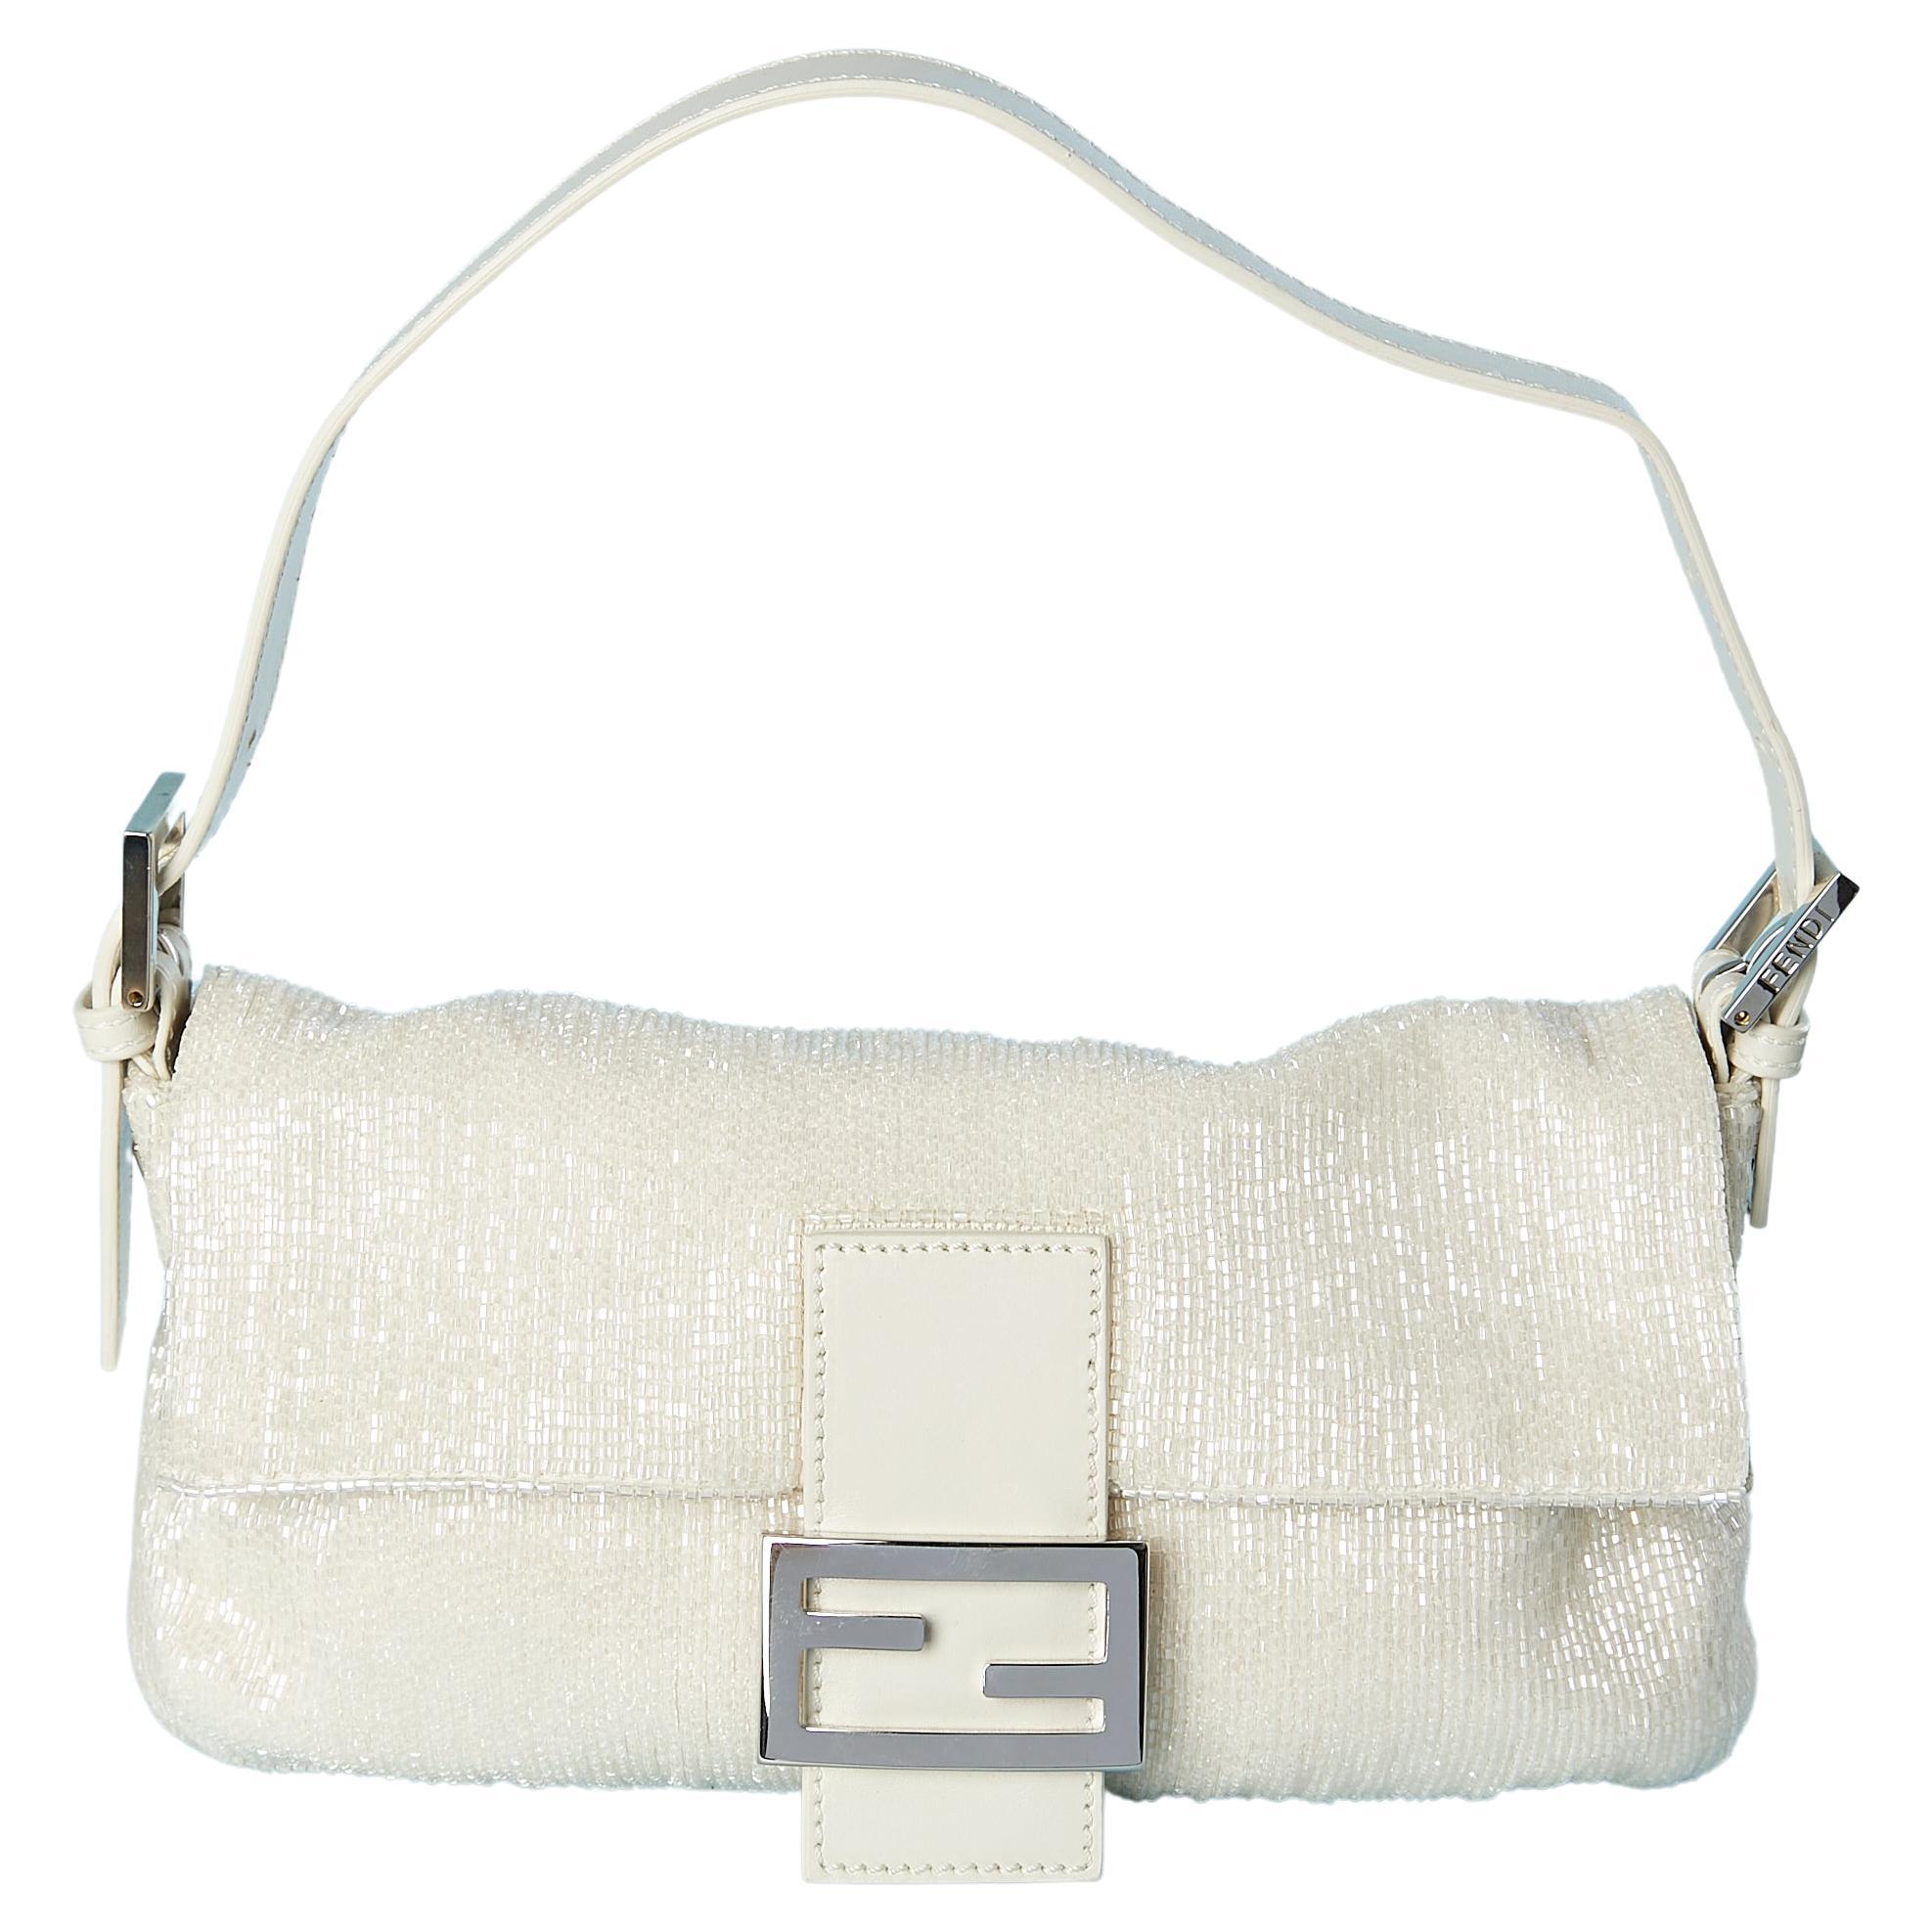 Off-white full beaded evening bag with leather details Fendi Baguettemania For Sale